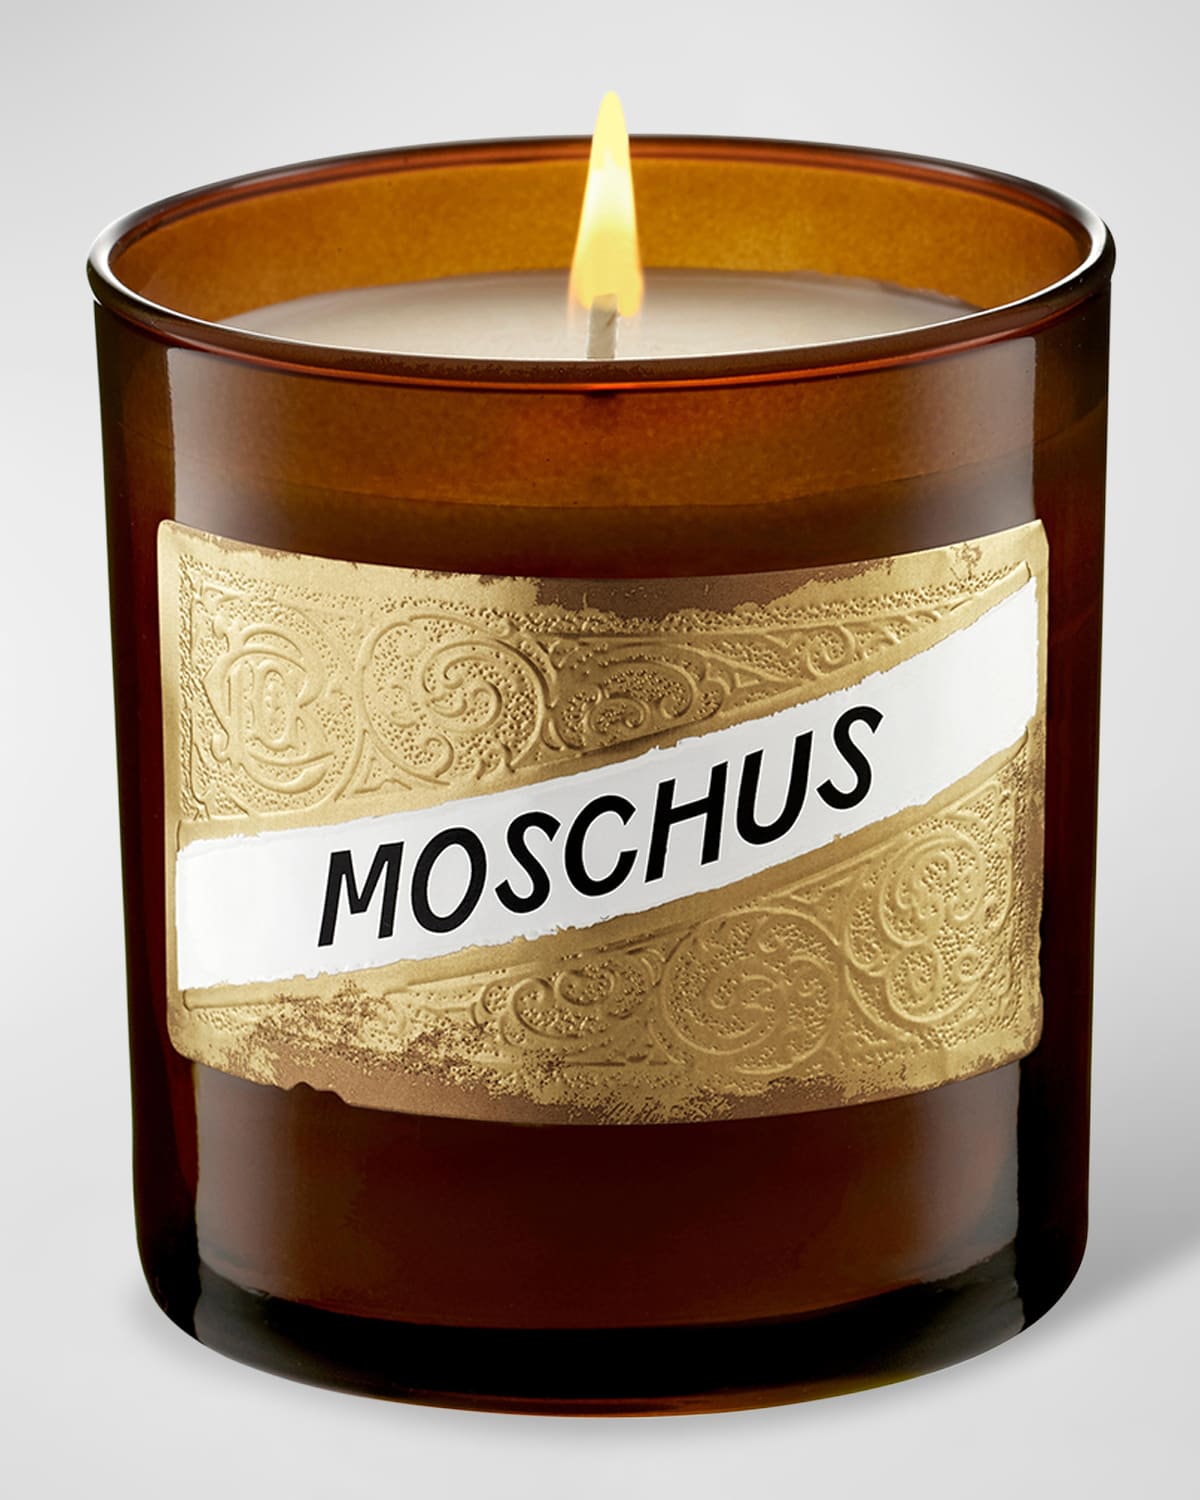 C.o. Bigelow Musk Moschus Candle, 9 Oz.